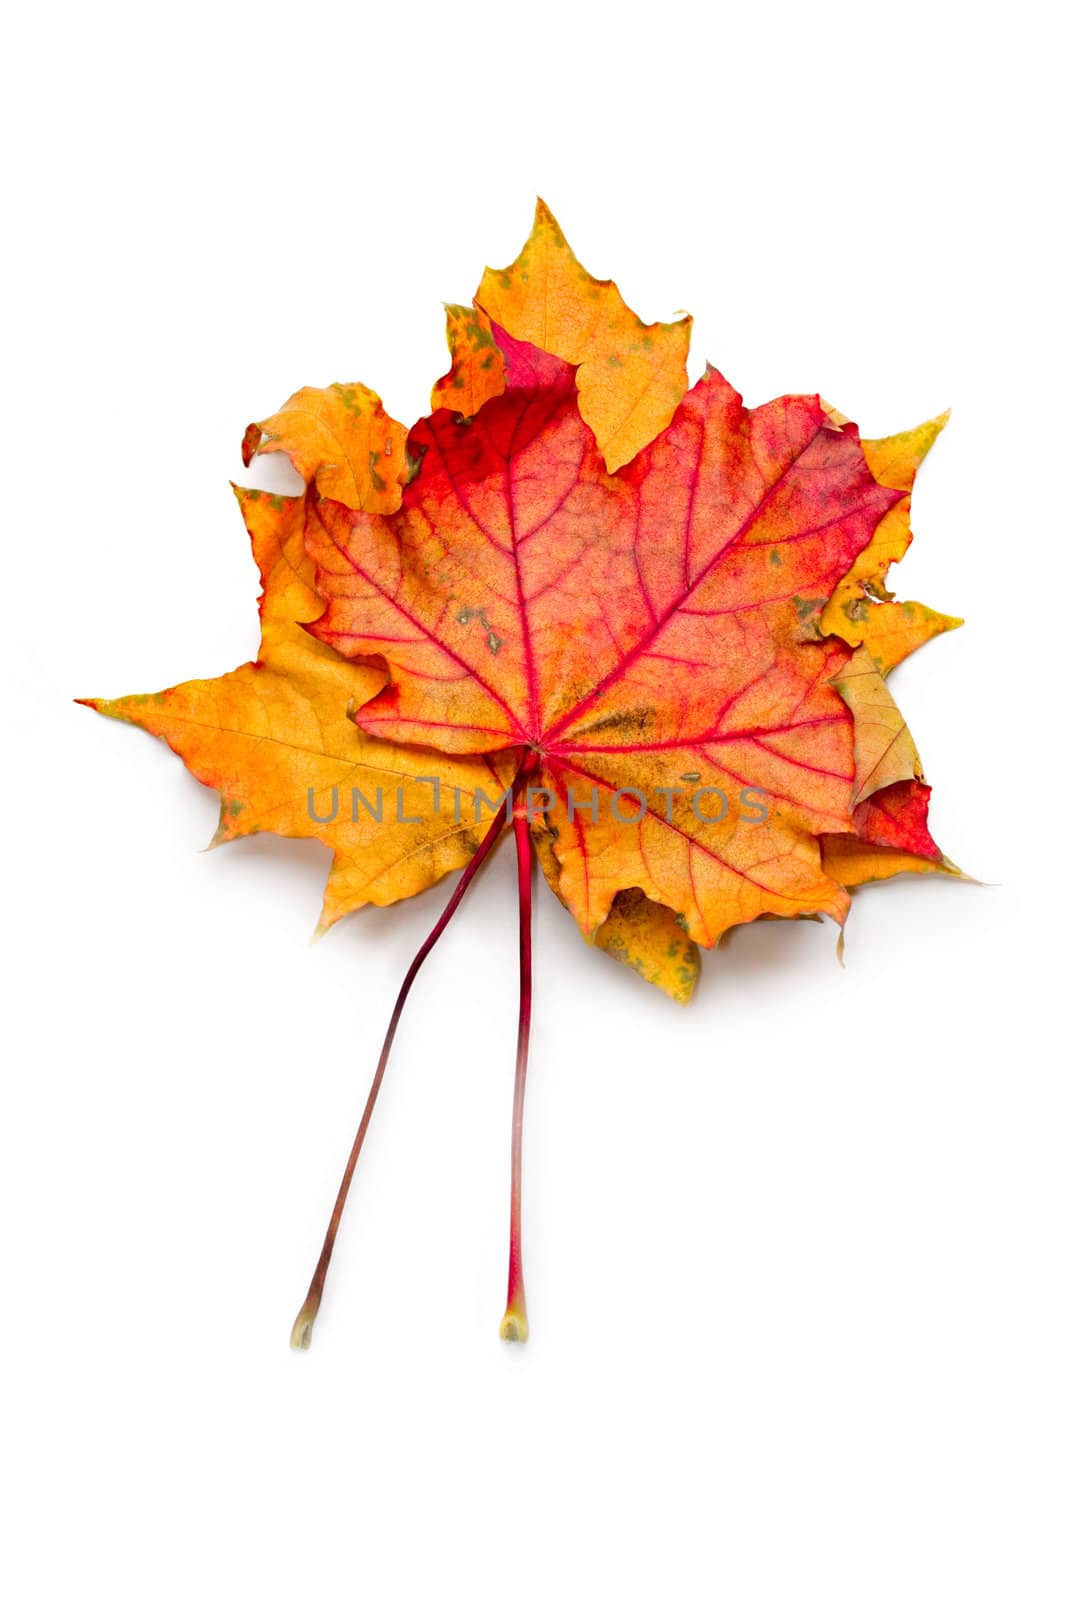 Autumn leaves isolated on the white background by Garsya